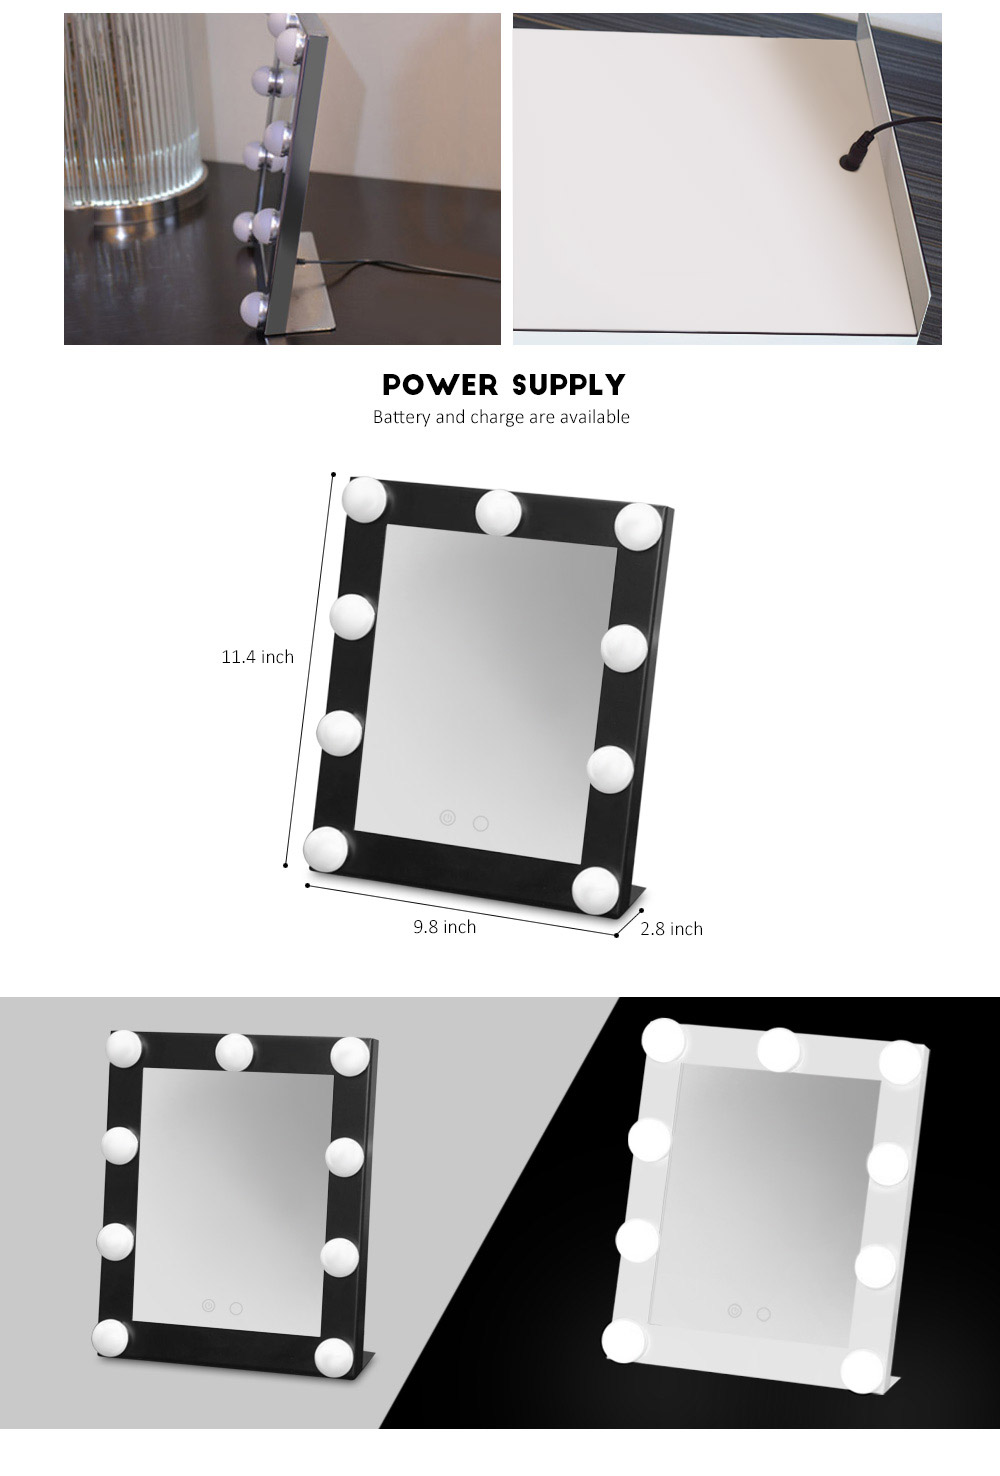 Table Square Single LED Model Portable Makeup Mirror with Bulbs Import Glass